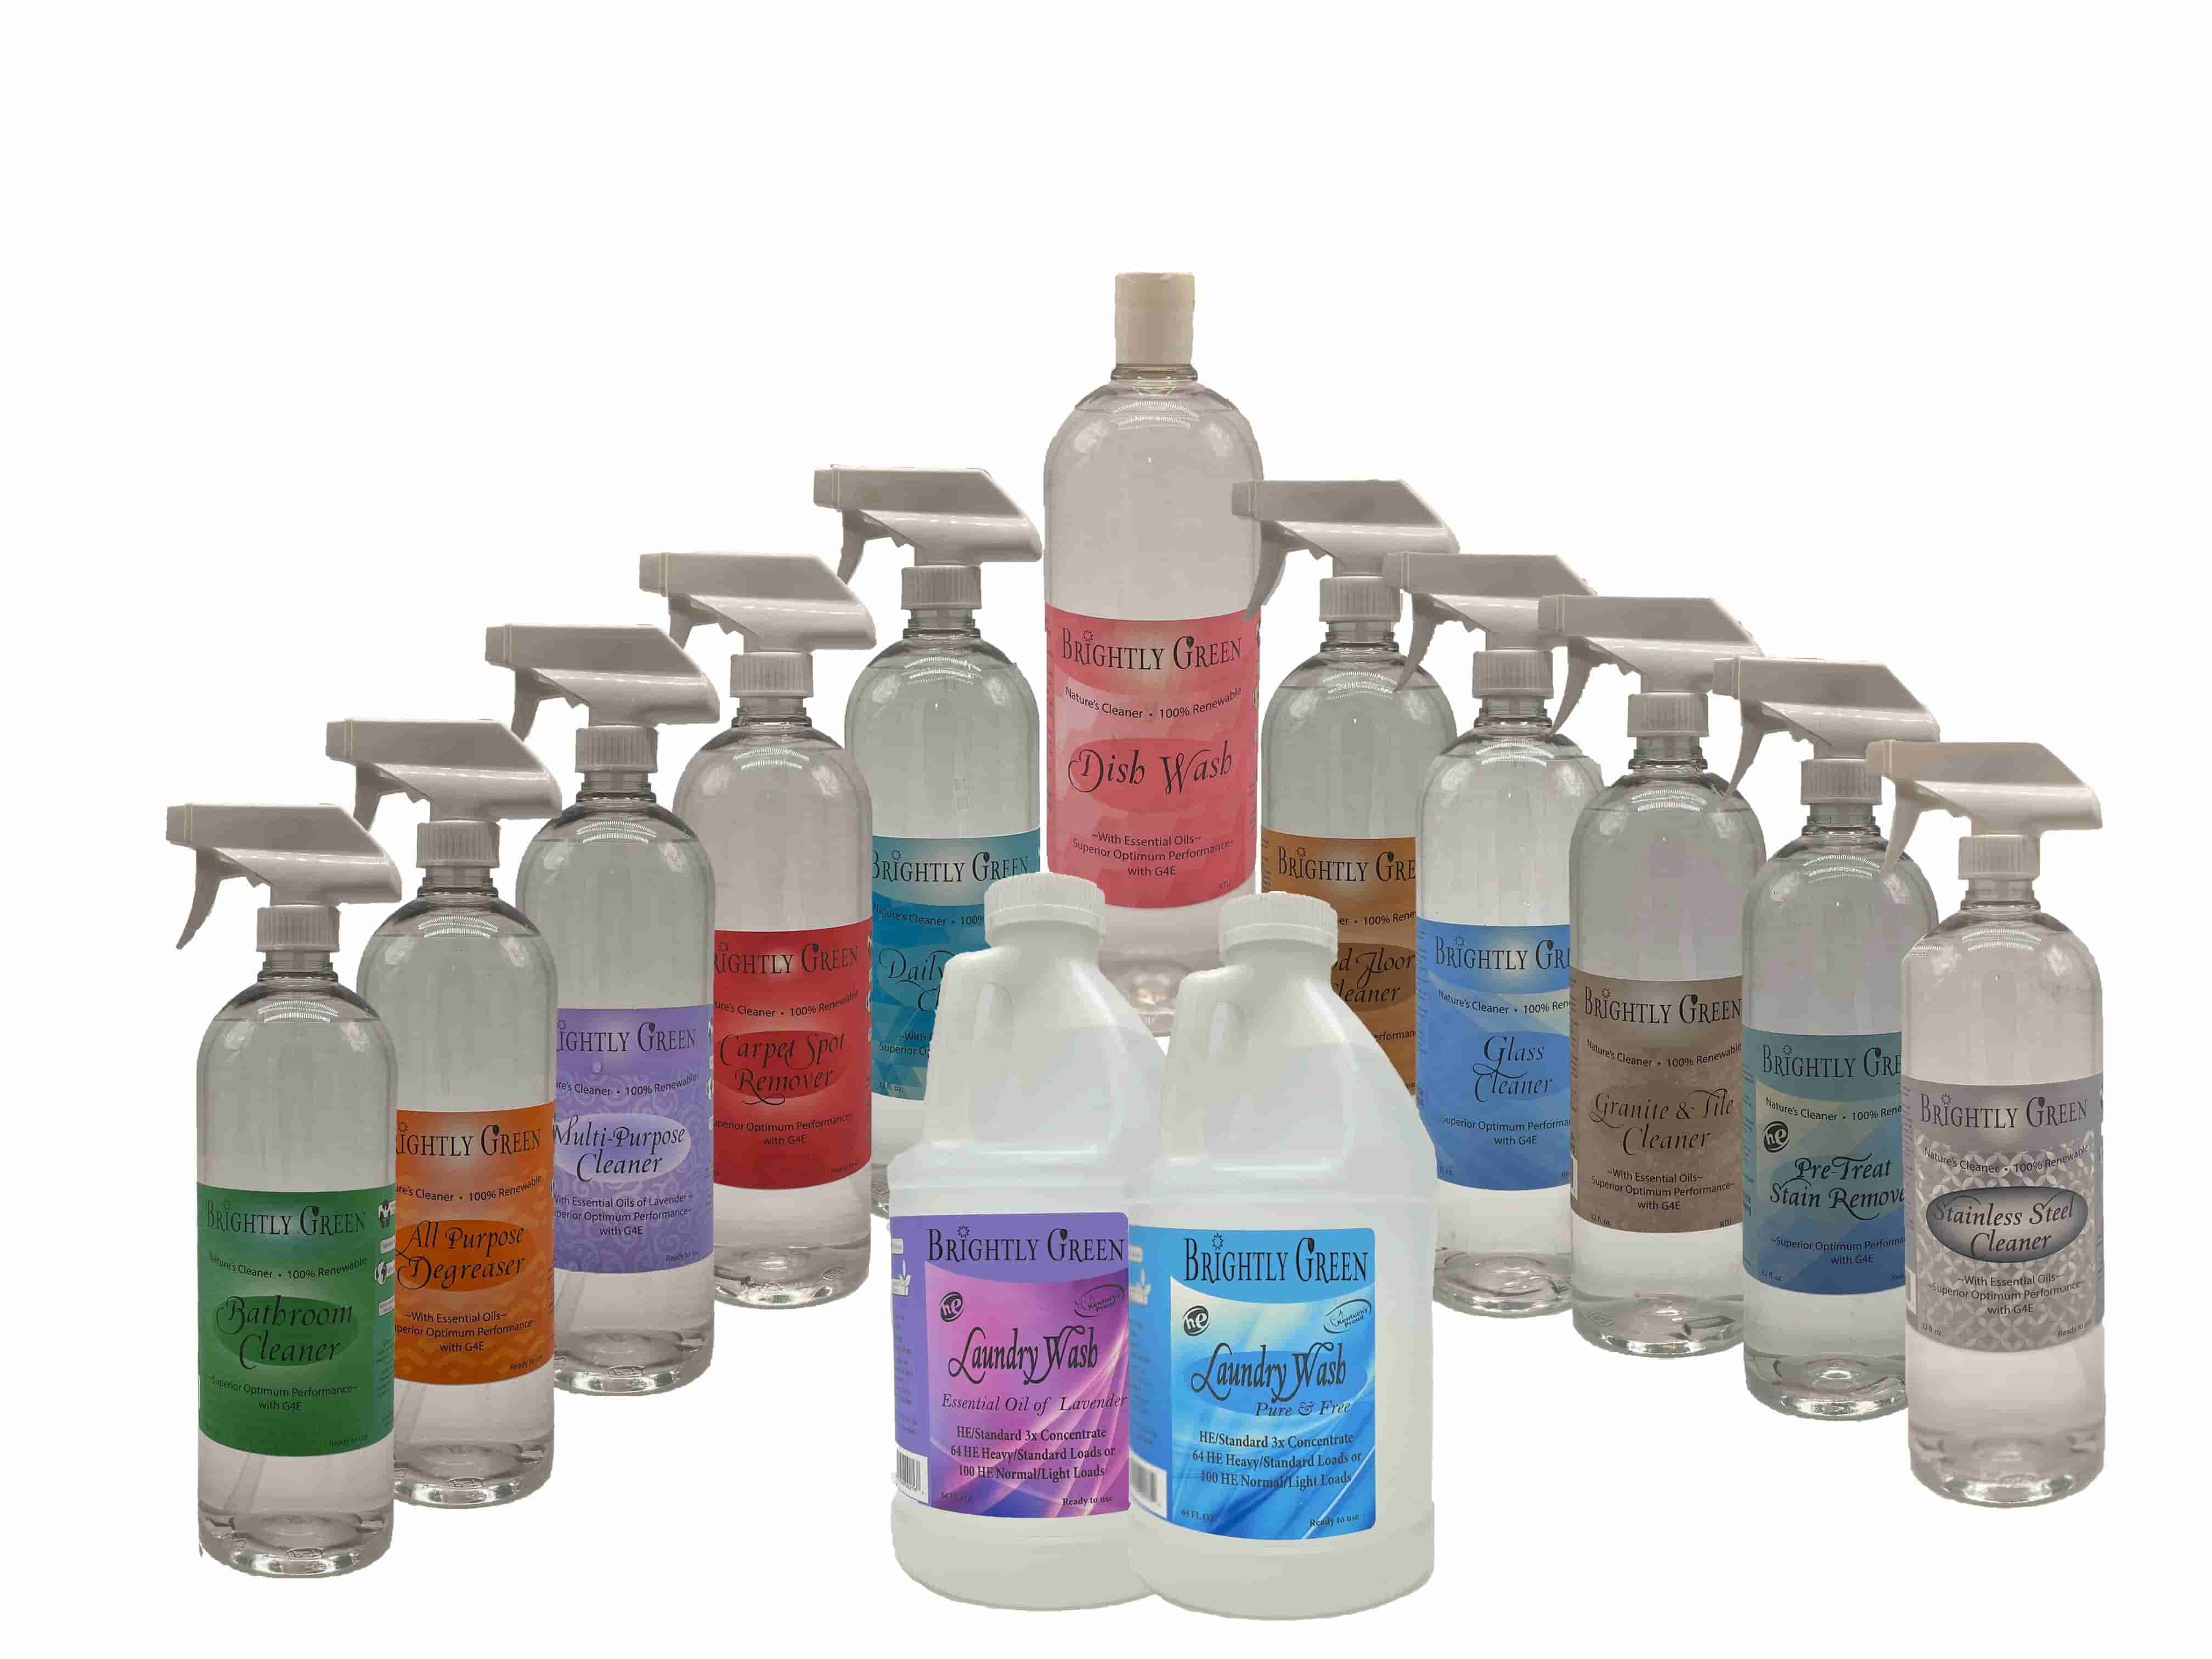 Wholesale earth friendly,zero waste,minimalist home 
green cleaning products, safe for children, pets, people and the earth. Eco friendly Our household cleaners